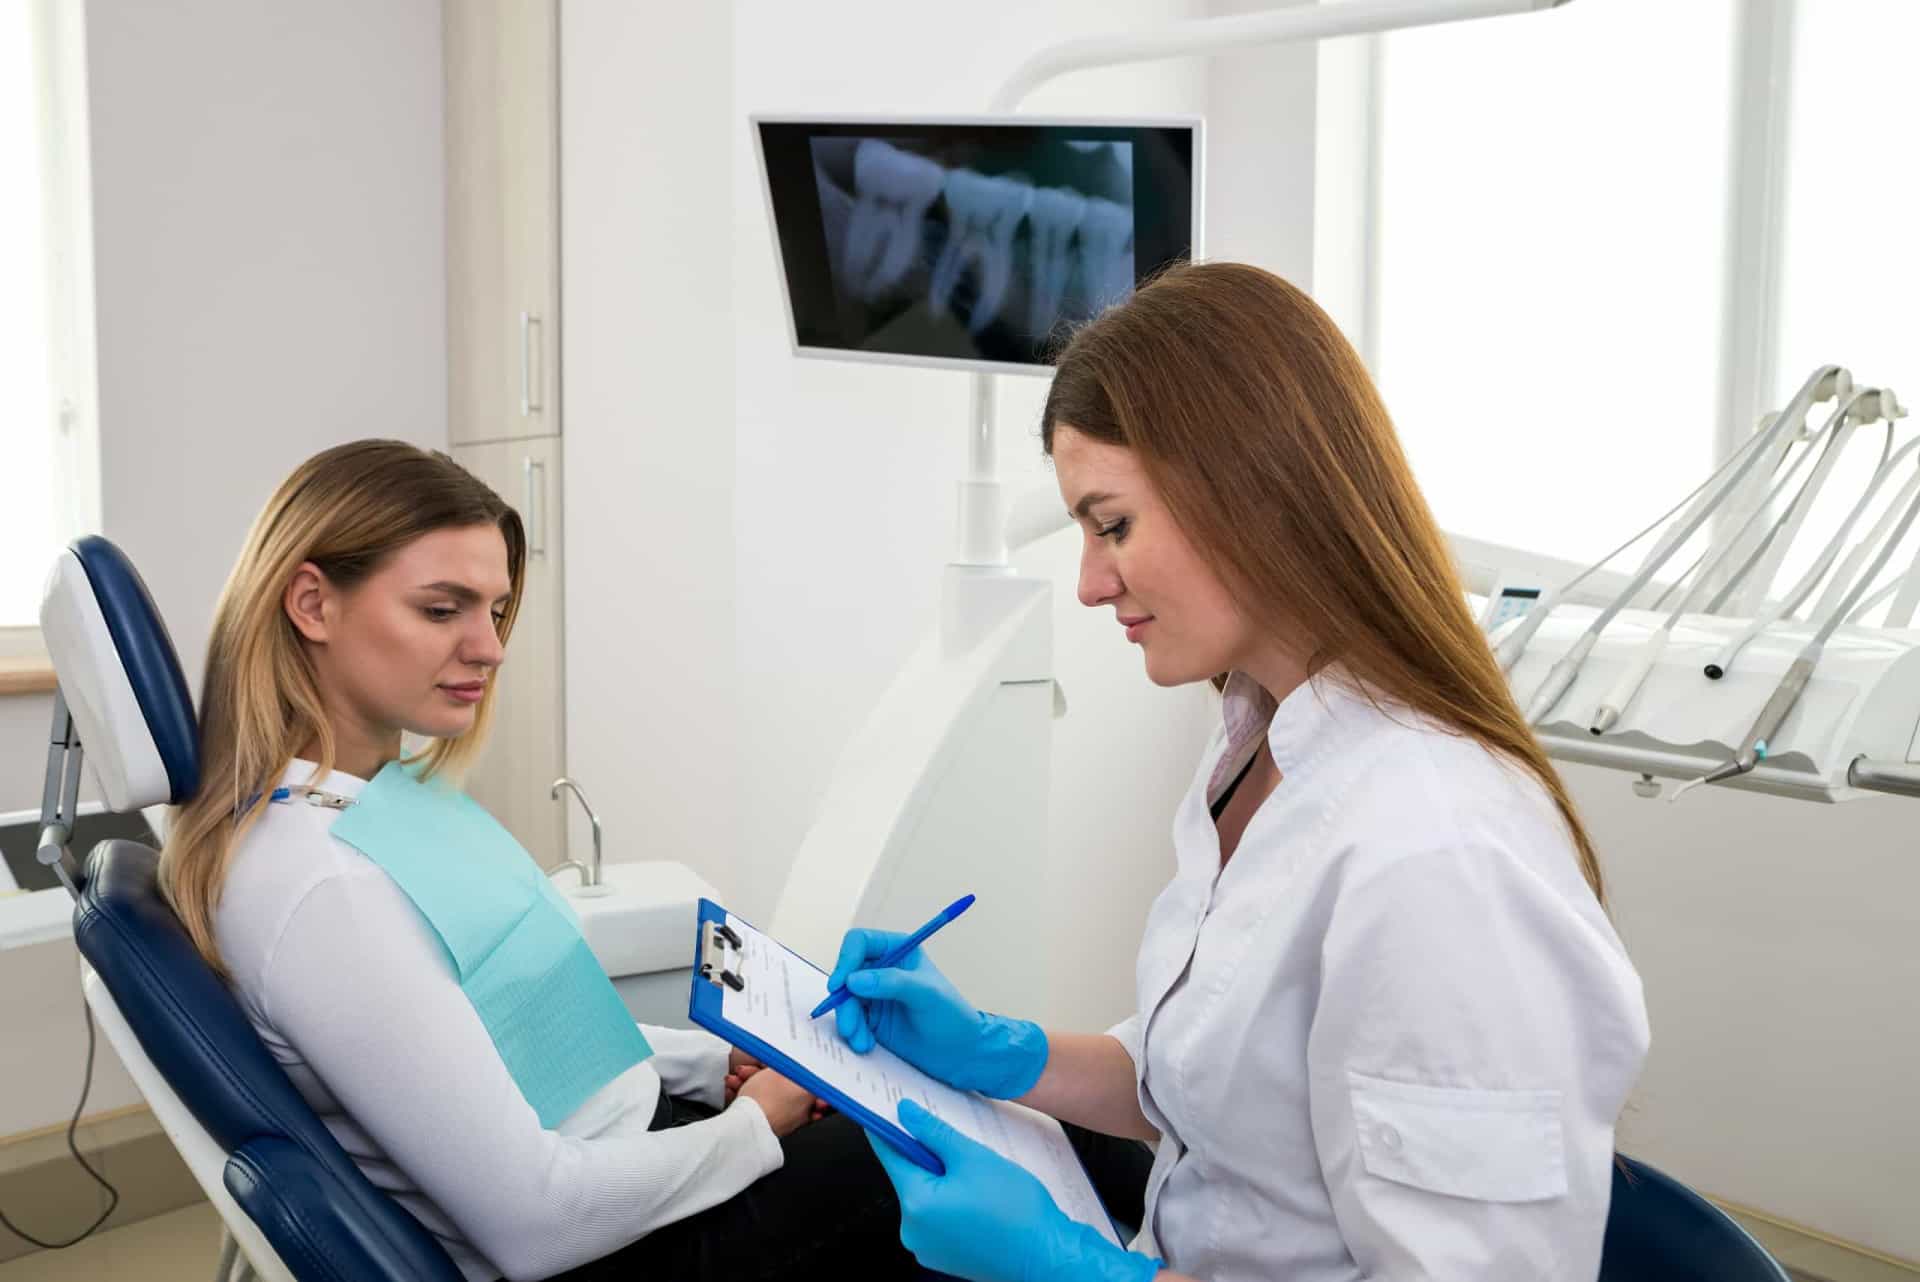 <p>It’s important that you are open about your medical history with your dentist. If you suffer from any conditions or have had surgery, it’s important to tell your dentist in advance of any dental procedures.</p><p>You may also like:<a href="https://www.starsinsider.com/n/317845?utm_source=msn.com&utm_medium=display&utm_campaign=referral_description&utm_content=516746en-en"> The deadliest surf spots on the planet</a></p>